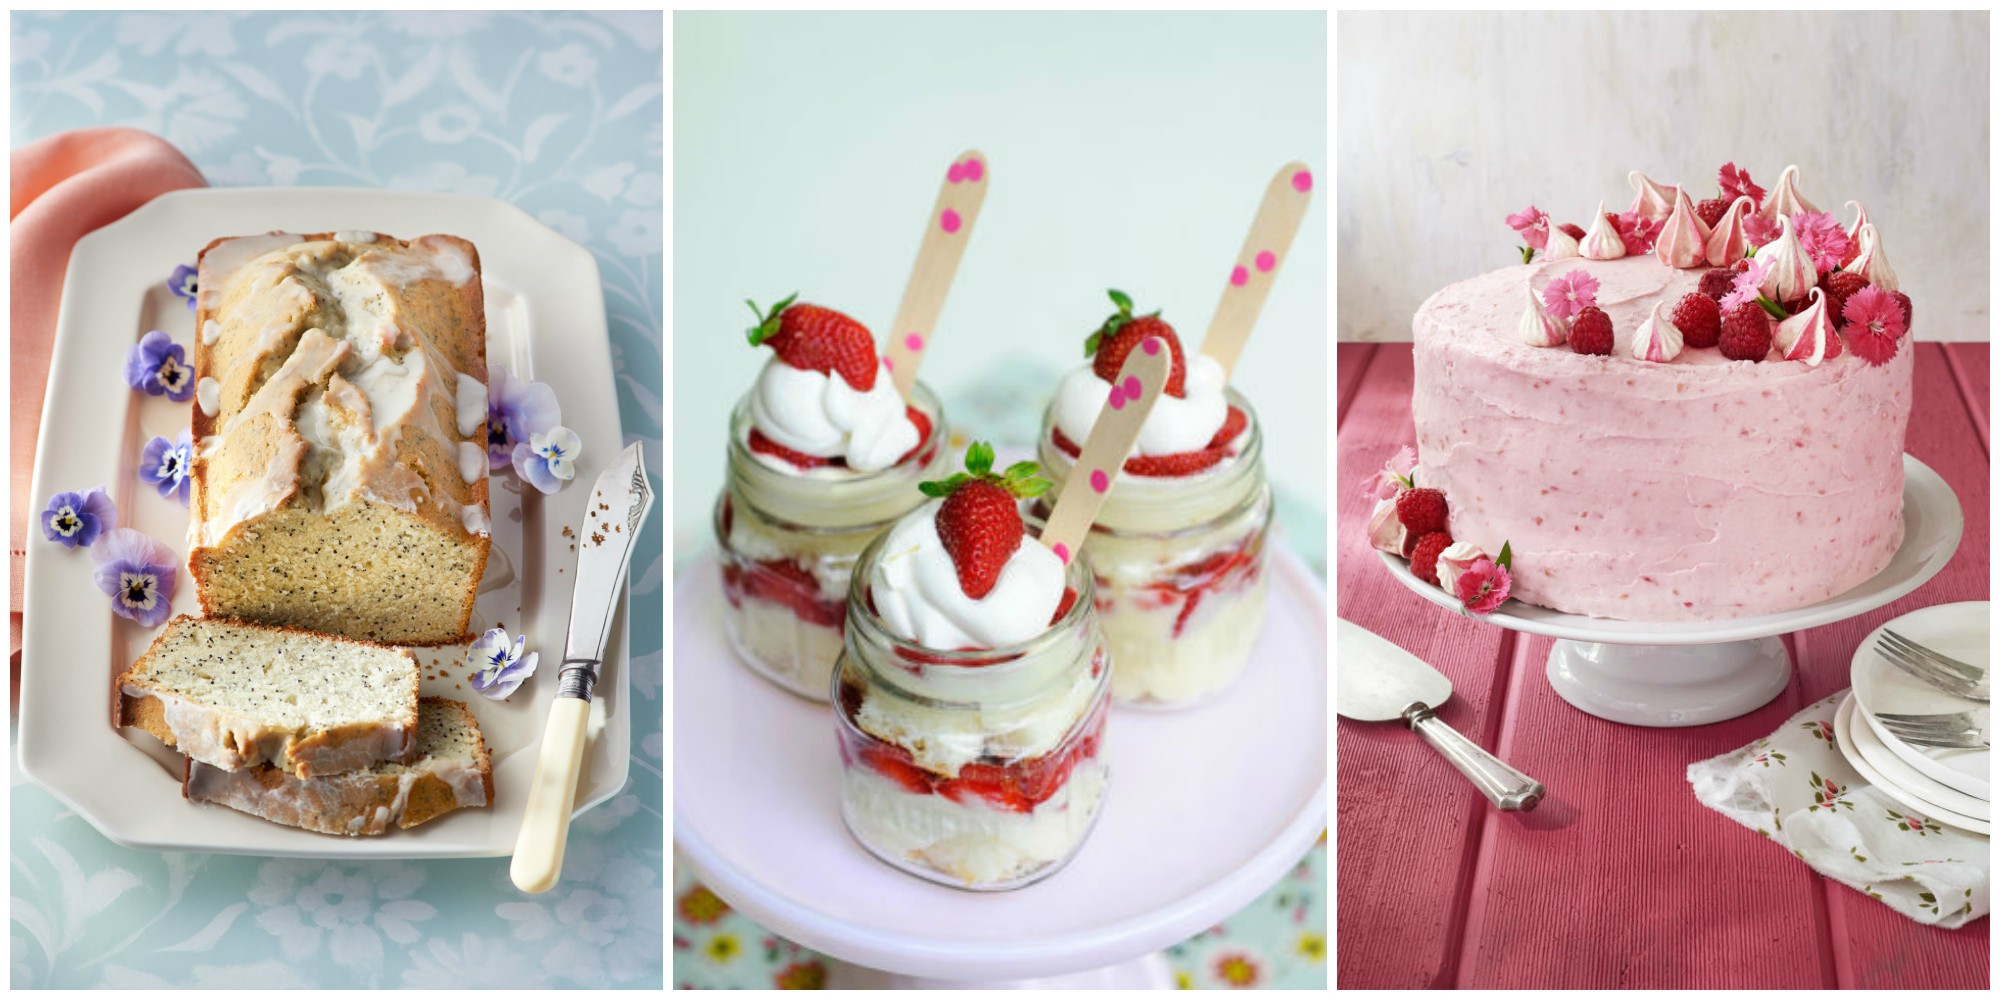 Easy Mother'S Day Desserts
 The Best Desserts for Mother s Day Best Round Up Recipe